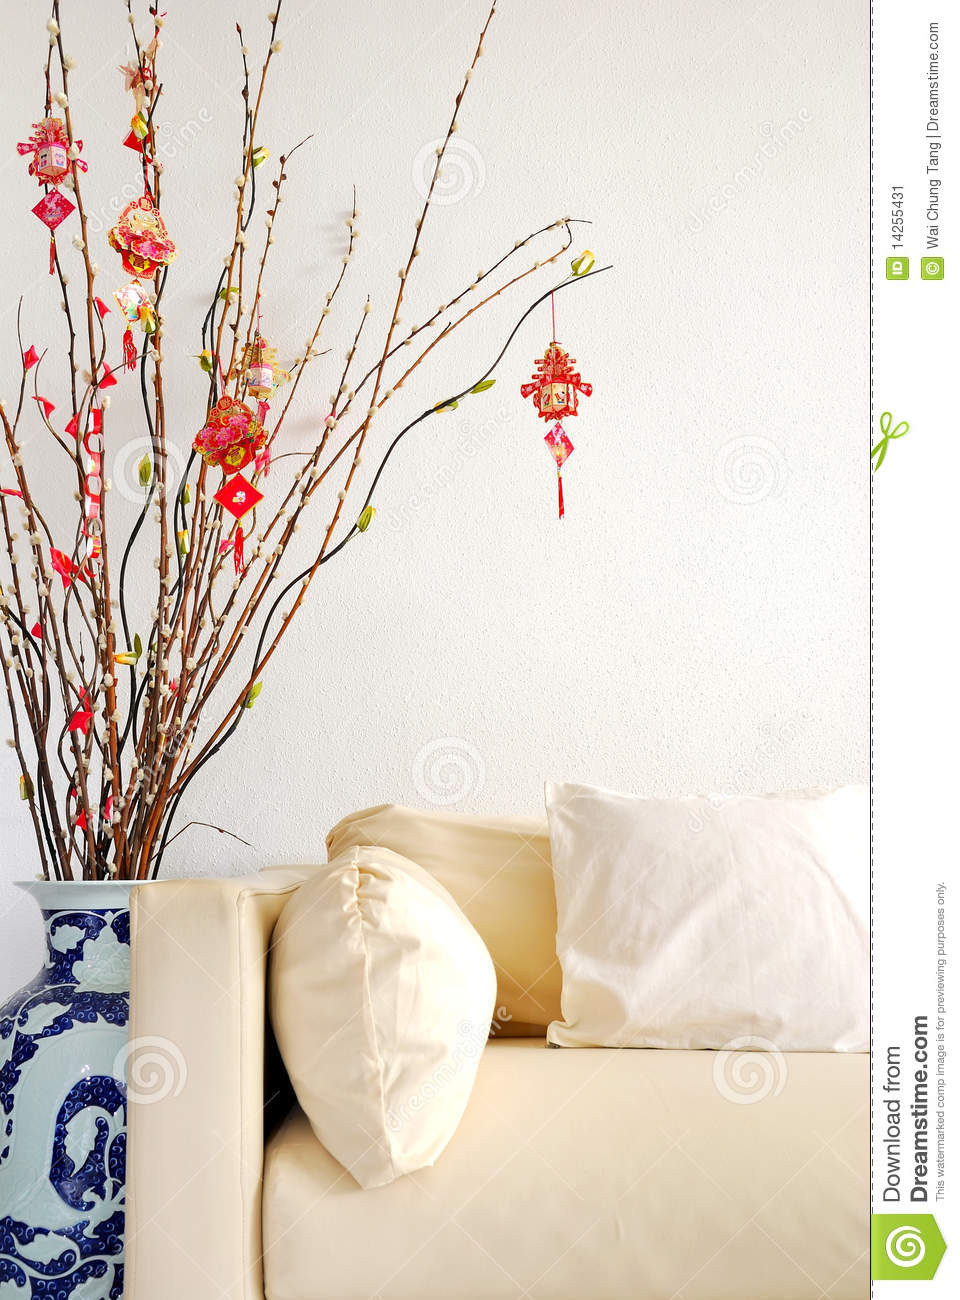 Lunar New Year Decor
 Chinese Lunar New Year Decoration Stock Image Image of